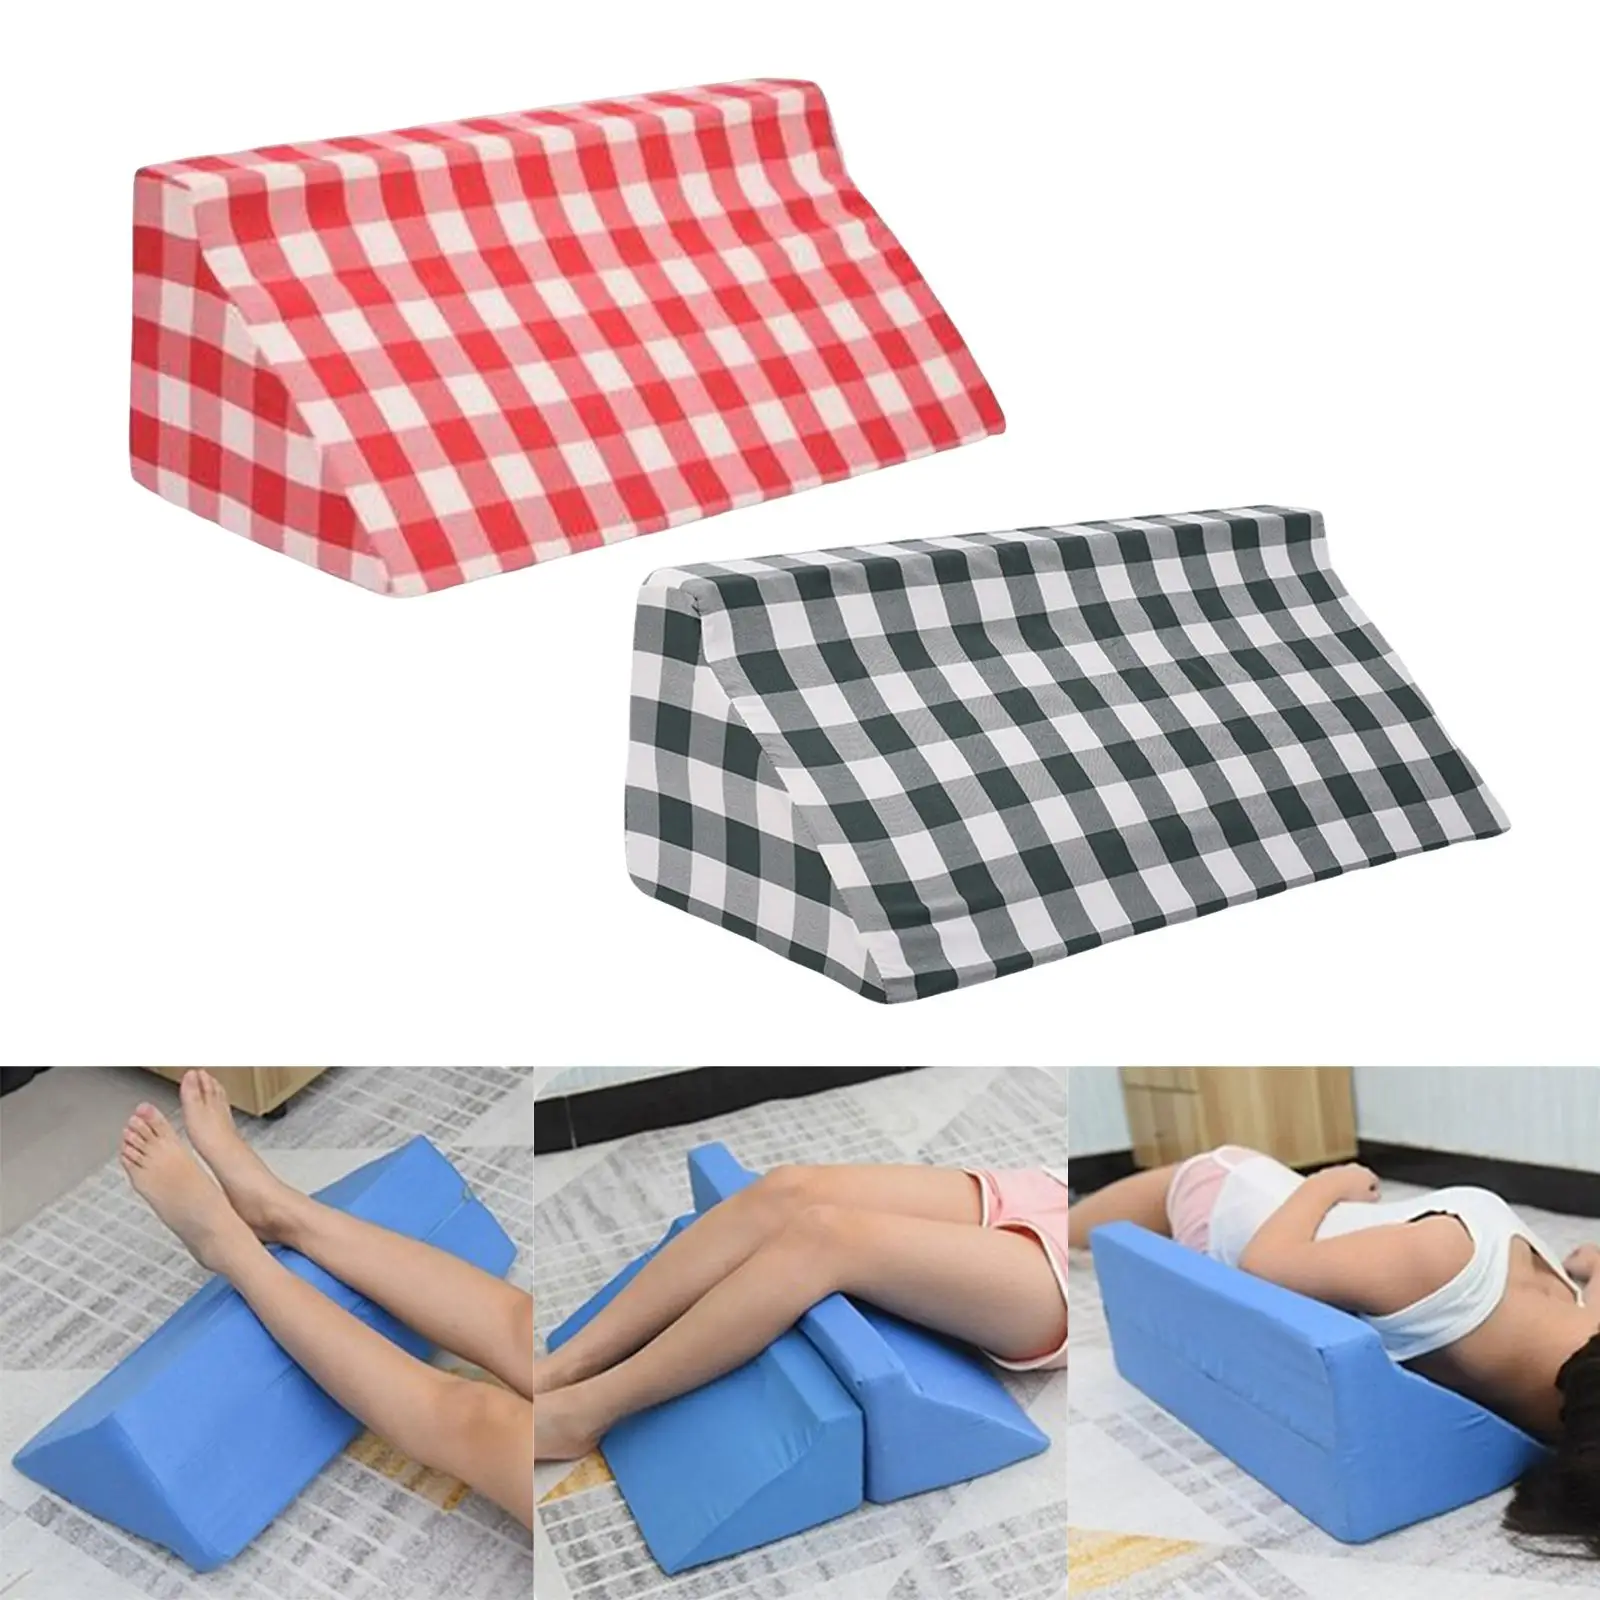 Foam Wedge s for Back for Sleeping Positioning Triangle Cushion Bed Wedge  for Disable Seniors Adults Elderly